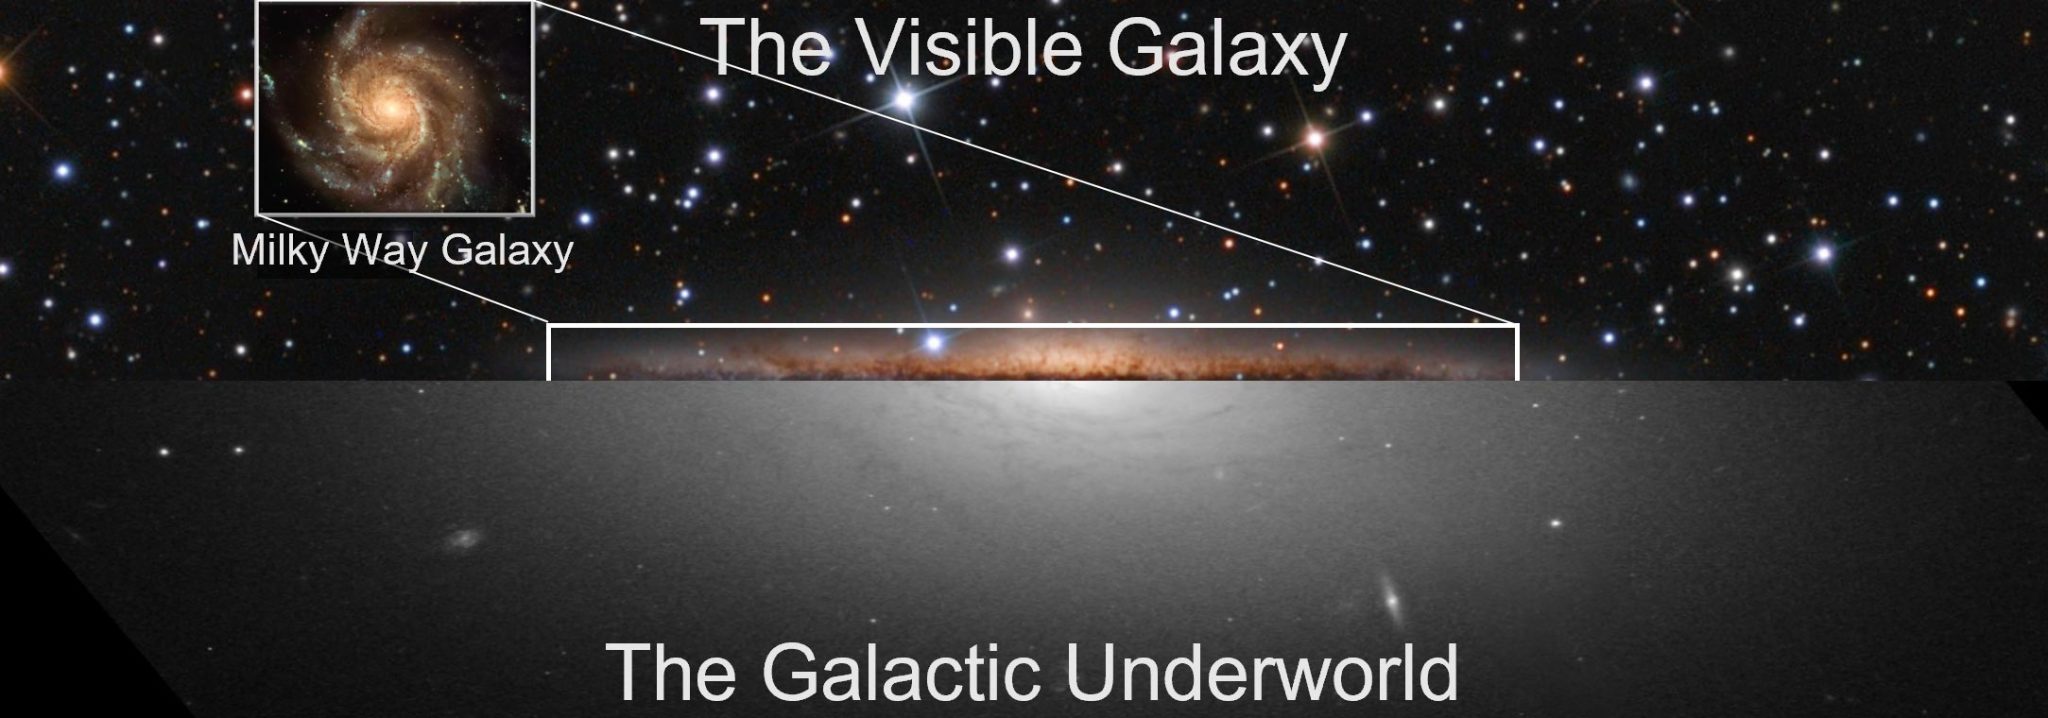 The visible Milky Way galaxy against its galactic underworld